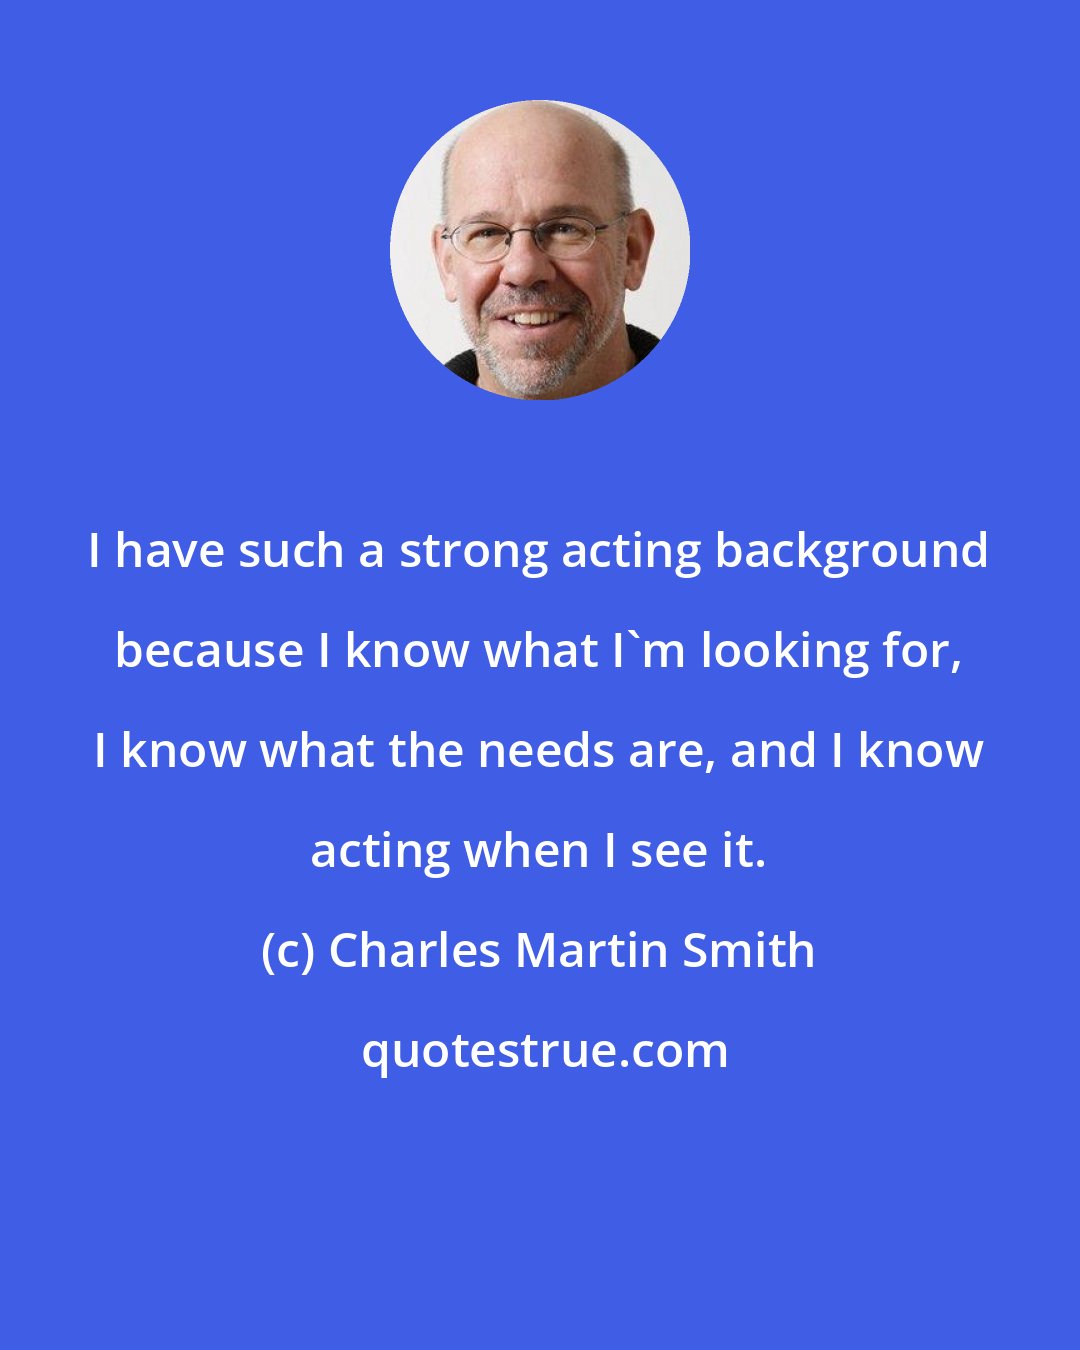 Charles Martin Smith: I have such a strong acting background because I know what I'm looking for, I know what the needs are, and I know acting when I see it.